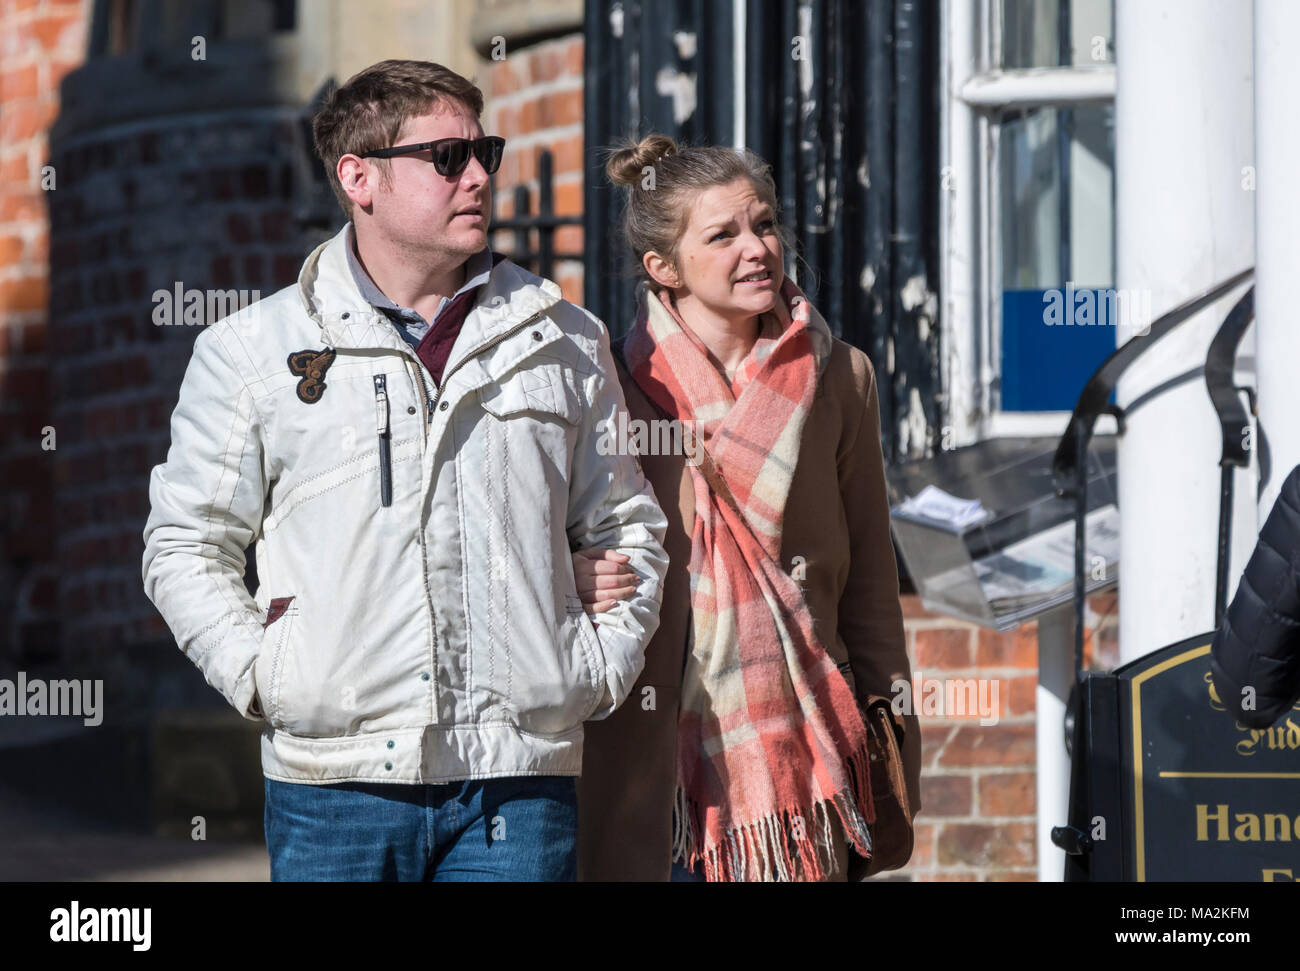 Young couple dressed in warm clothes walking through a small town linking arms in Winter in the UK. Stock Photo